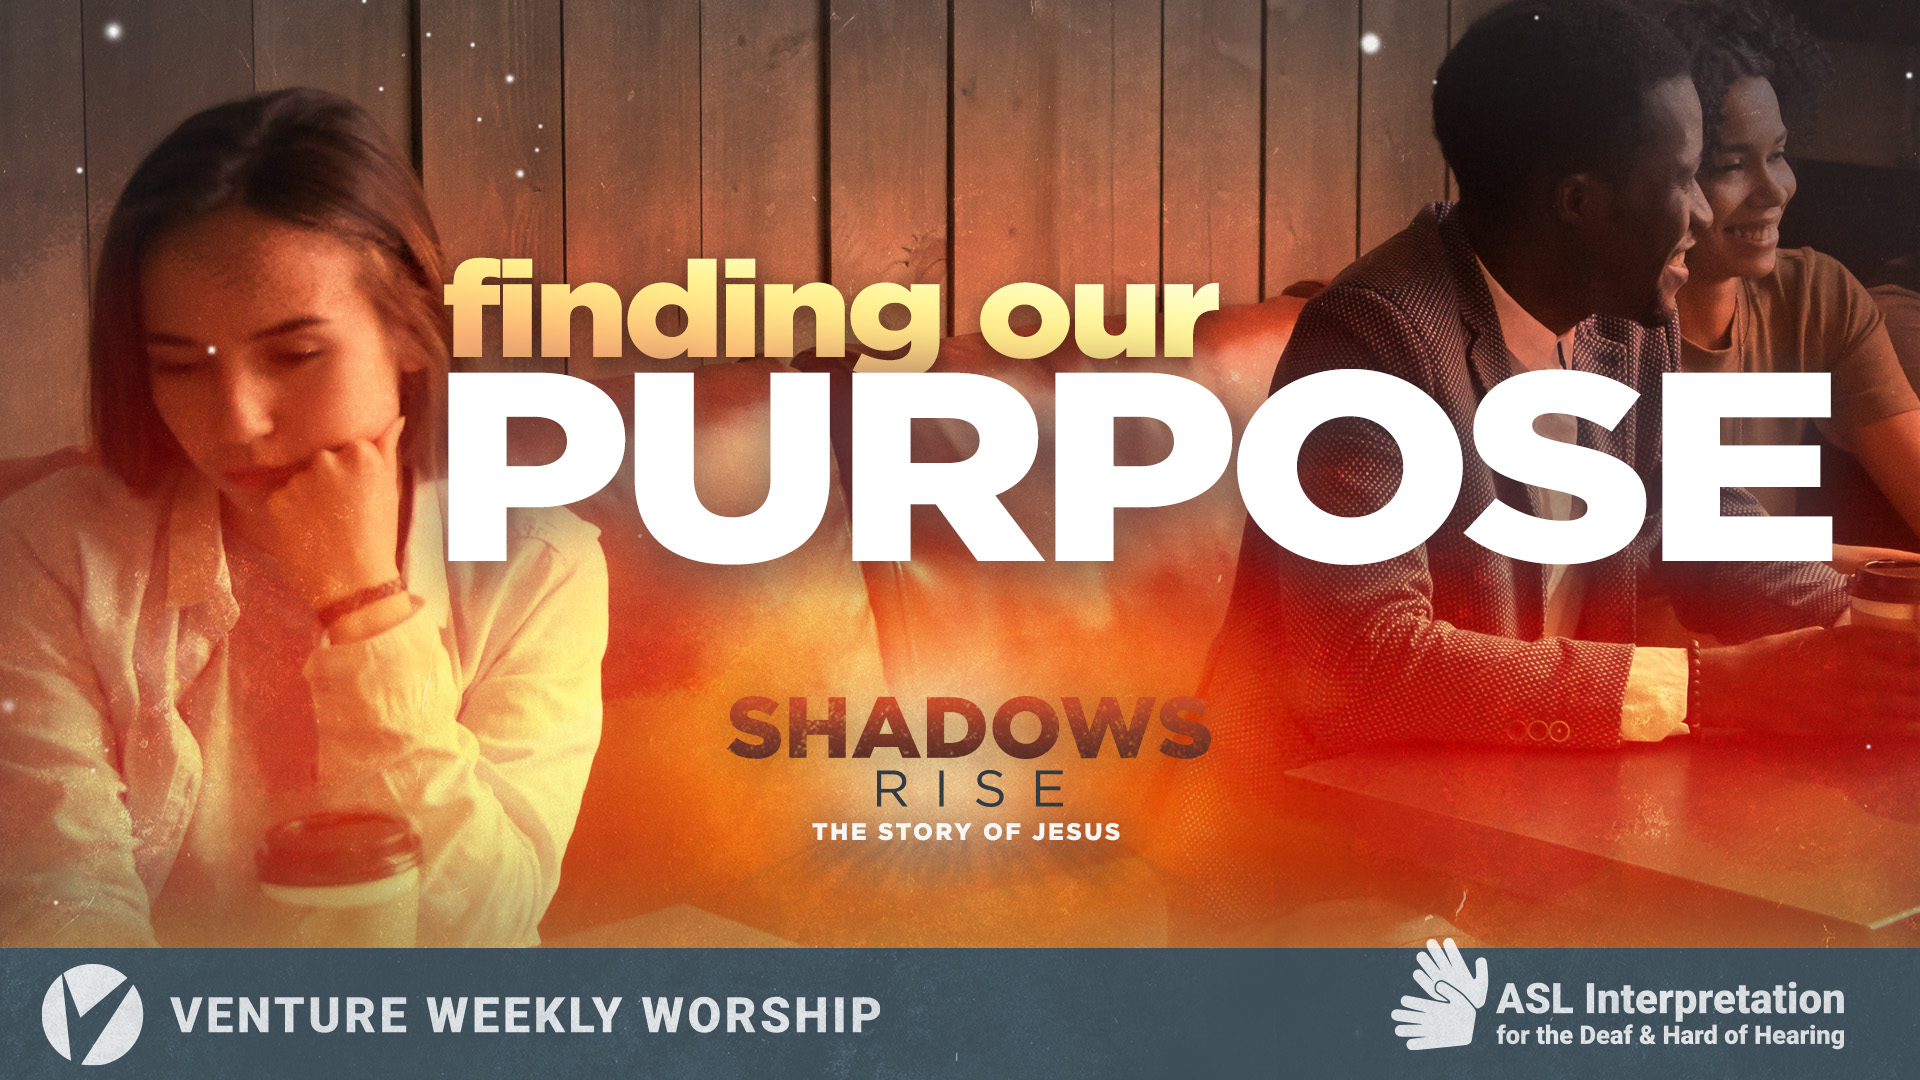 Shadows Rise: Where Do We Find Purpose?